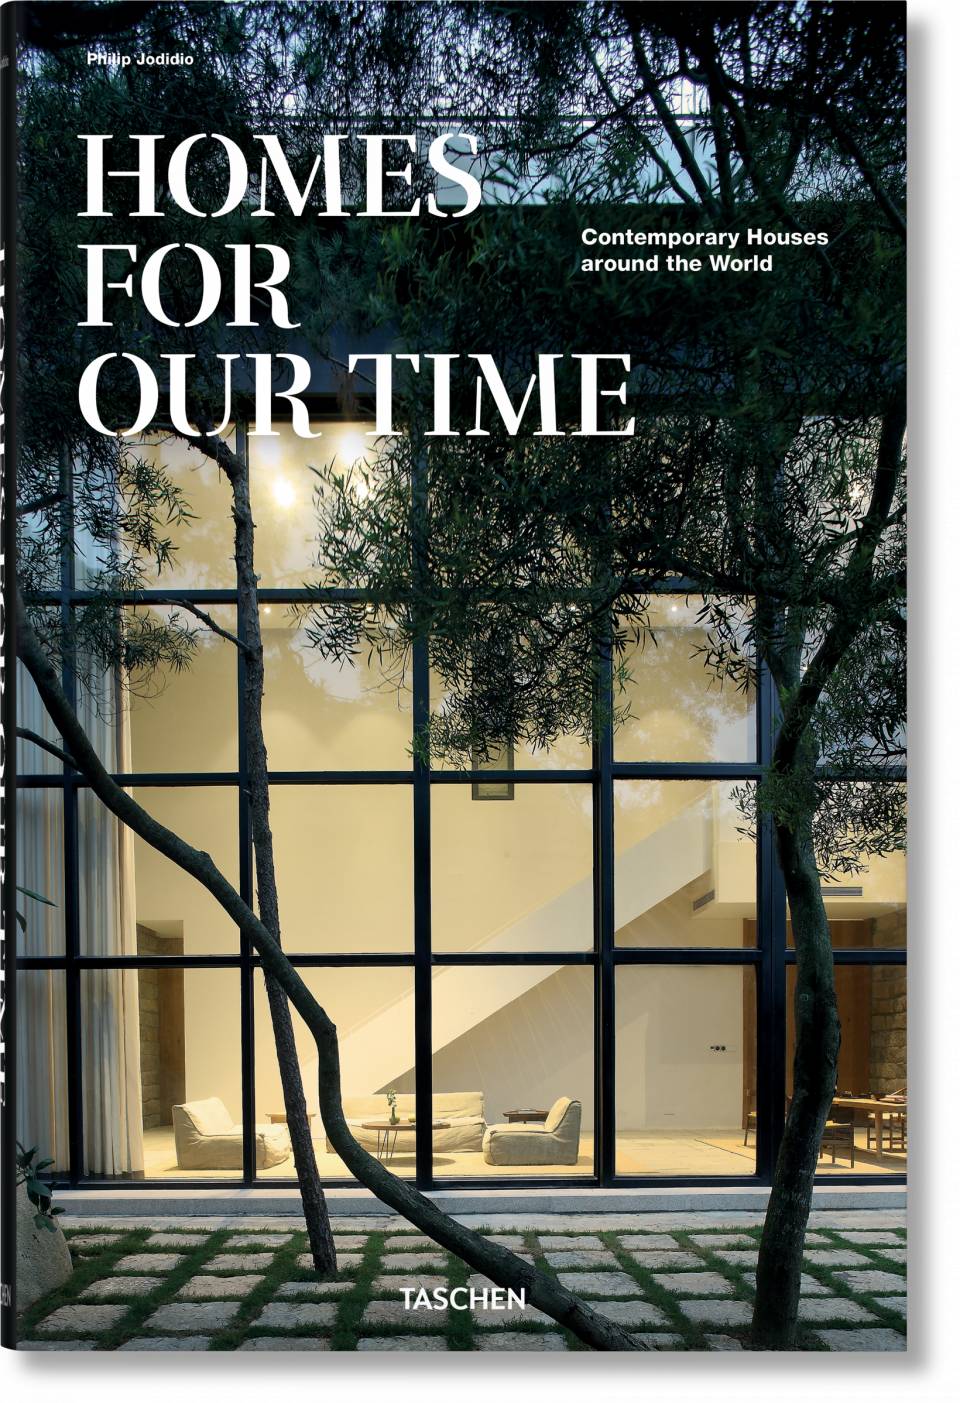 Homes for Our Time. Contemporary Houses Around the World.